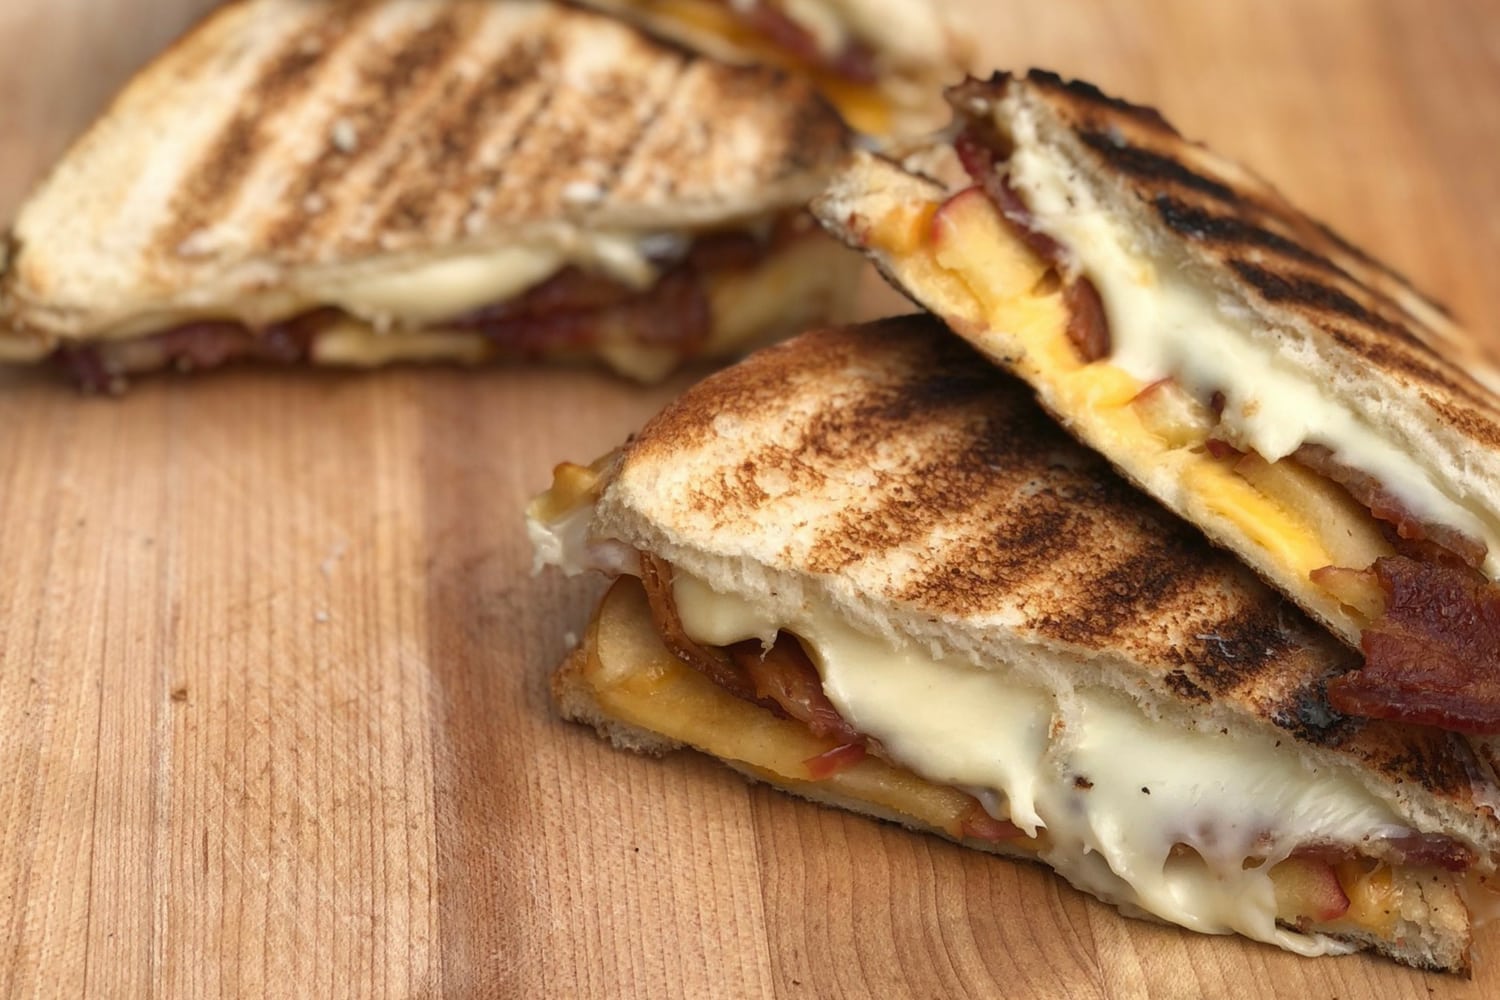 Cedar Planked Grilled Cheese Sandwich